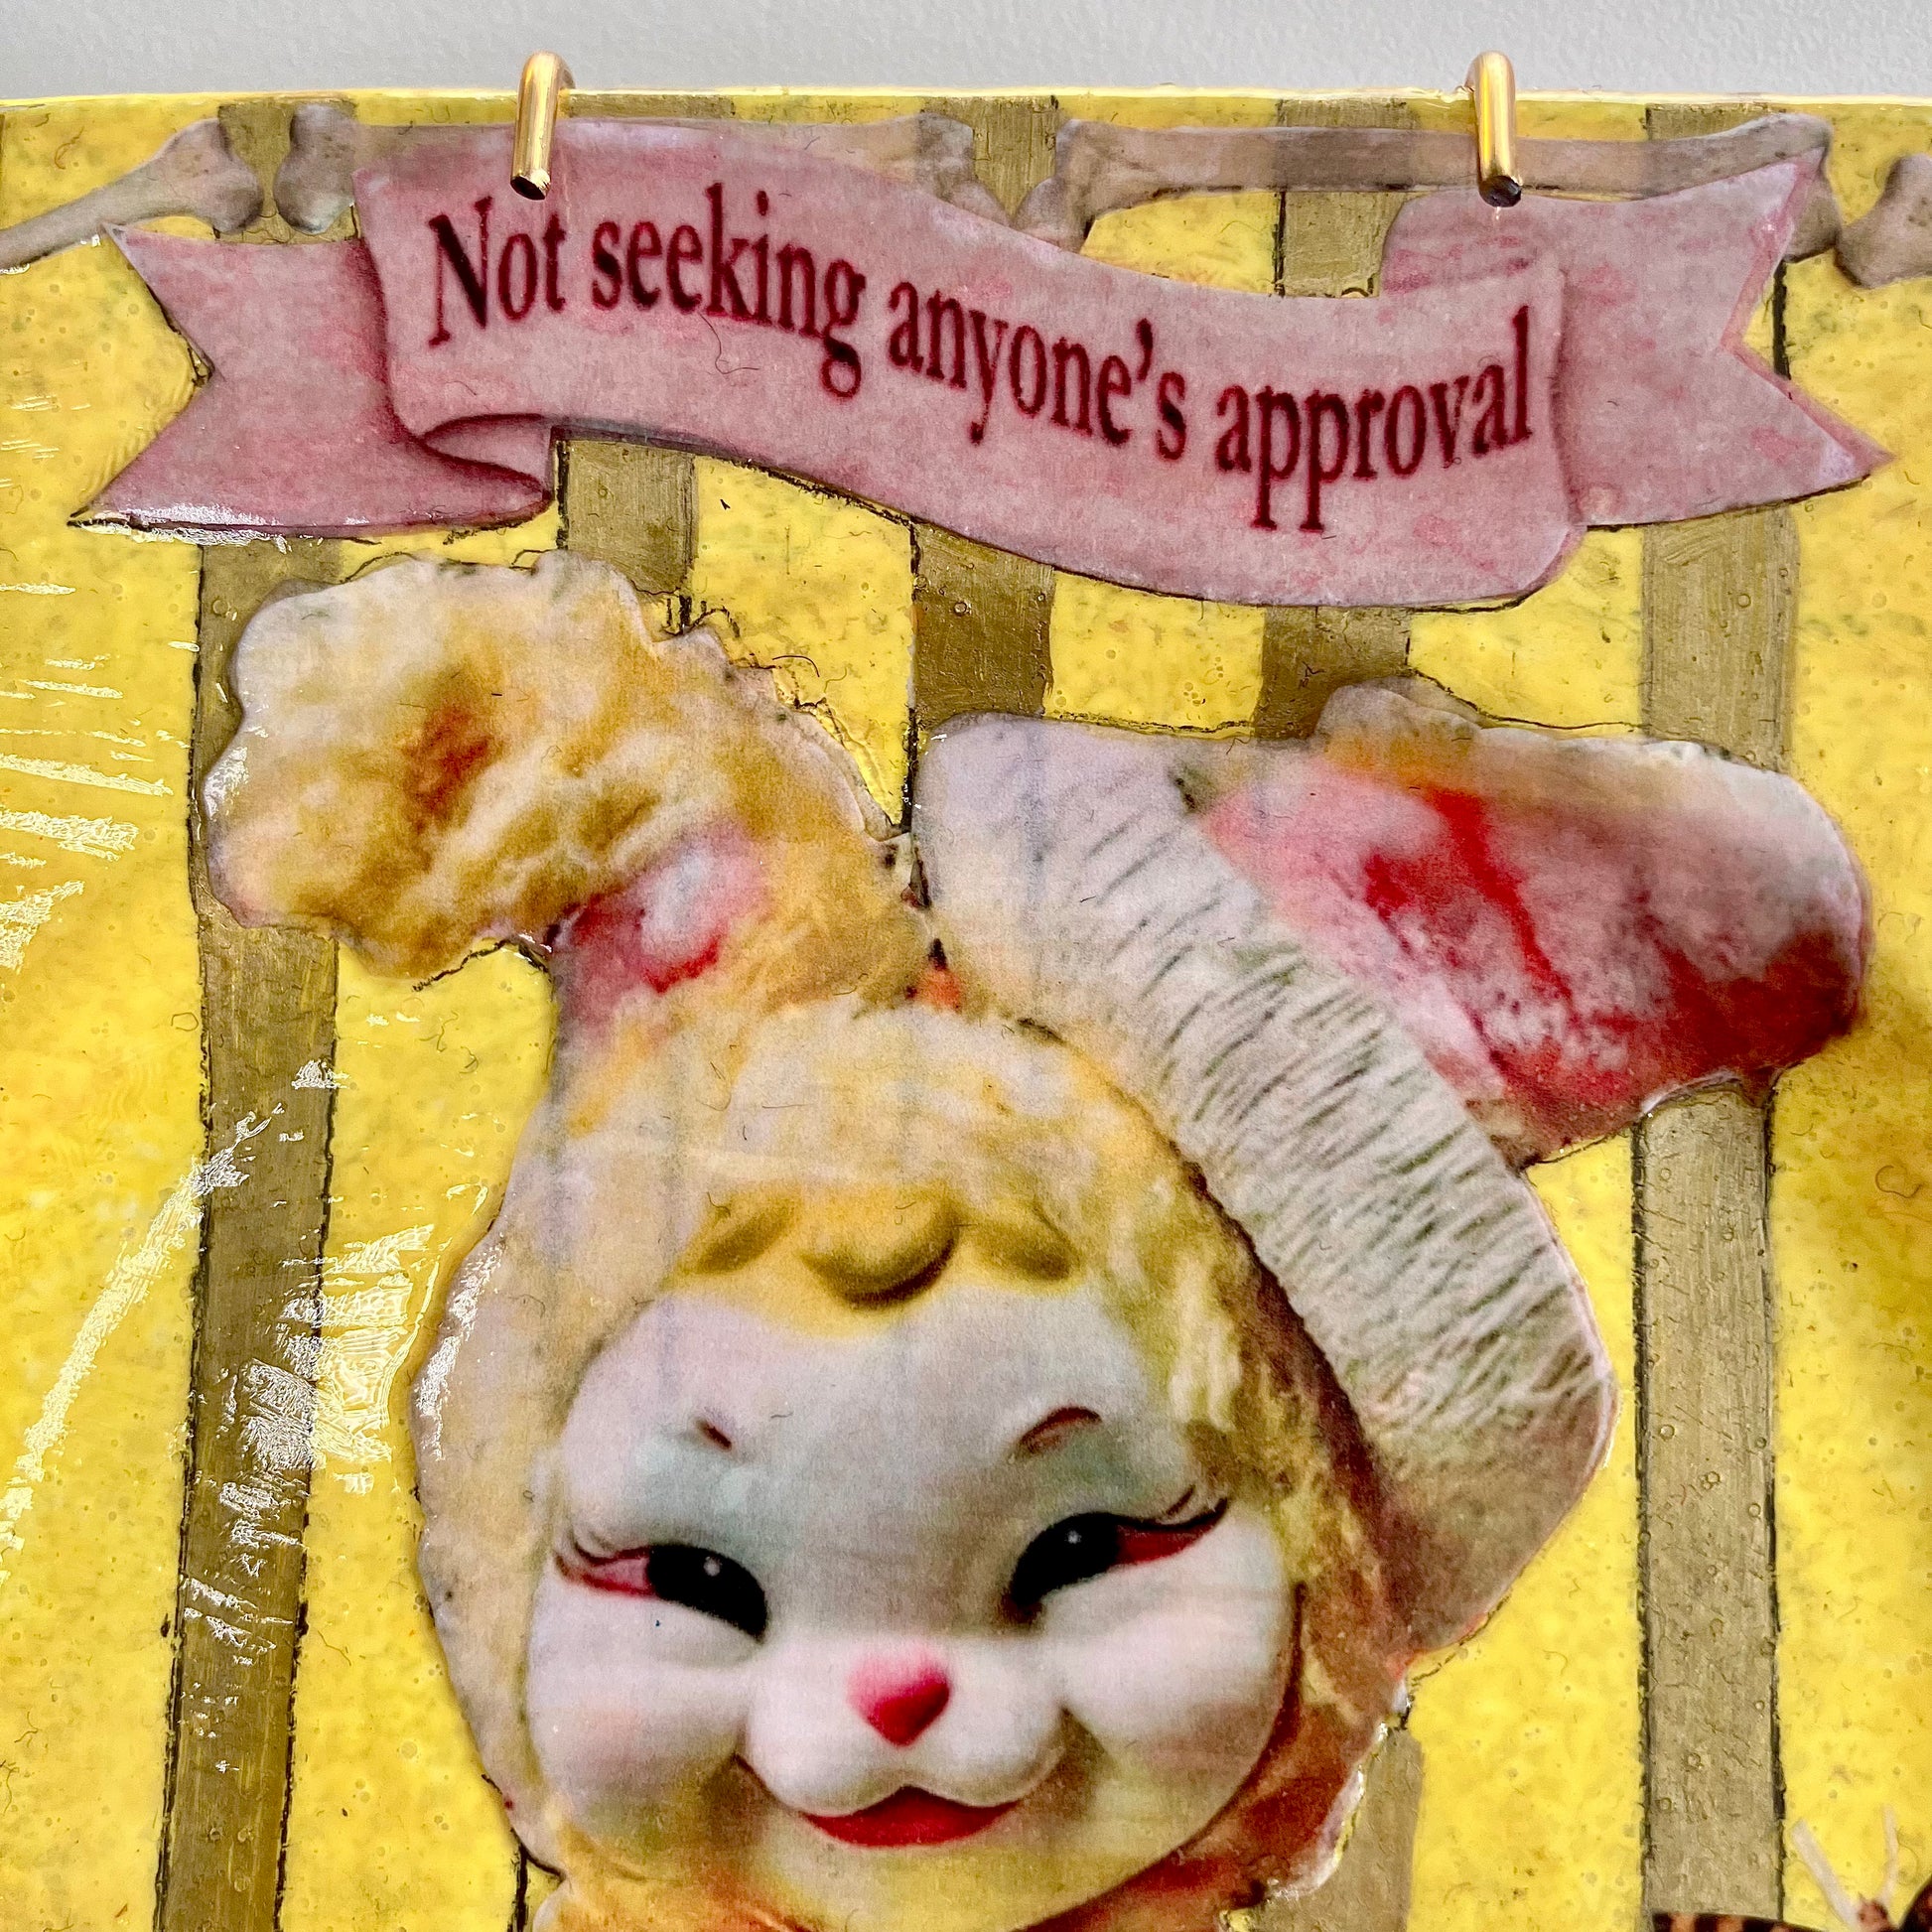 "Not Seeking Anyone's Approval" Wall Plate by House of Frisson, closeup detail of the collage showing a vintage bunny toy against a yellow and gold background.